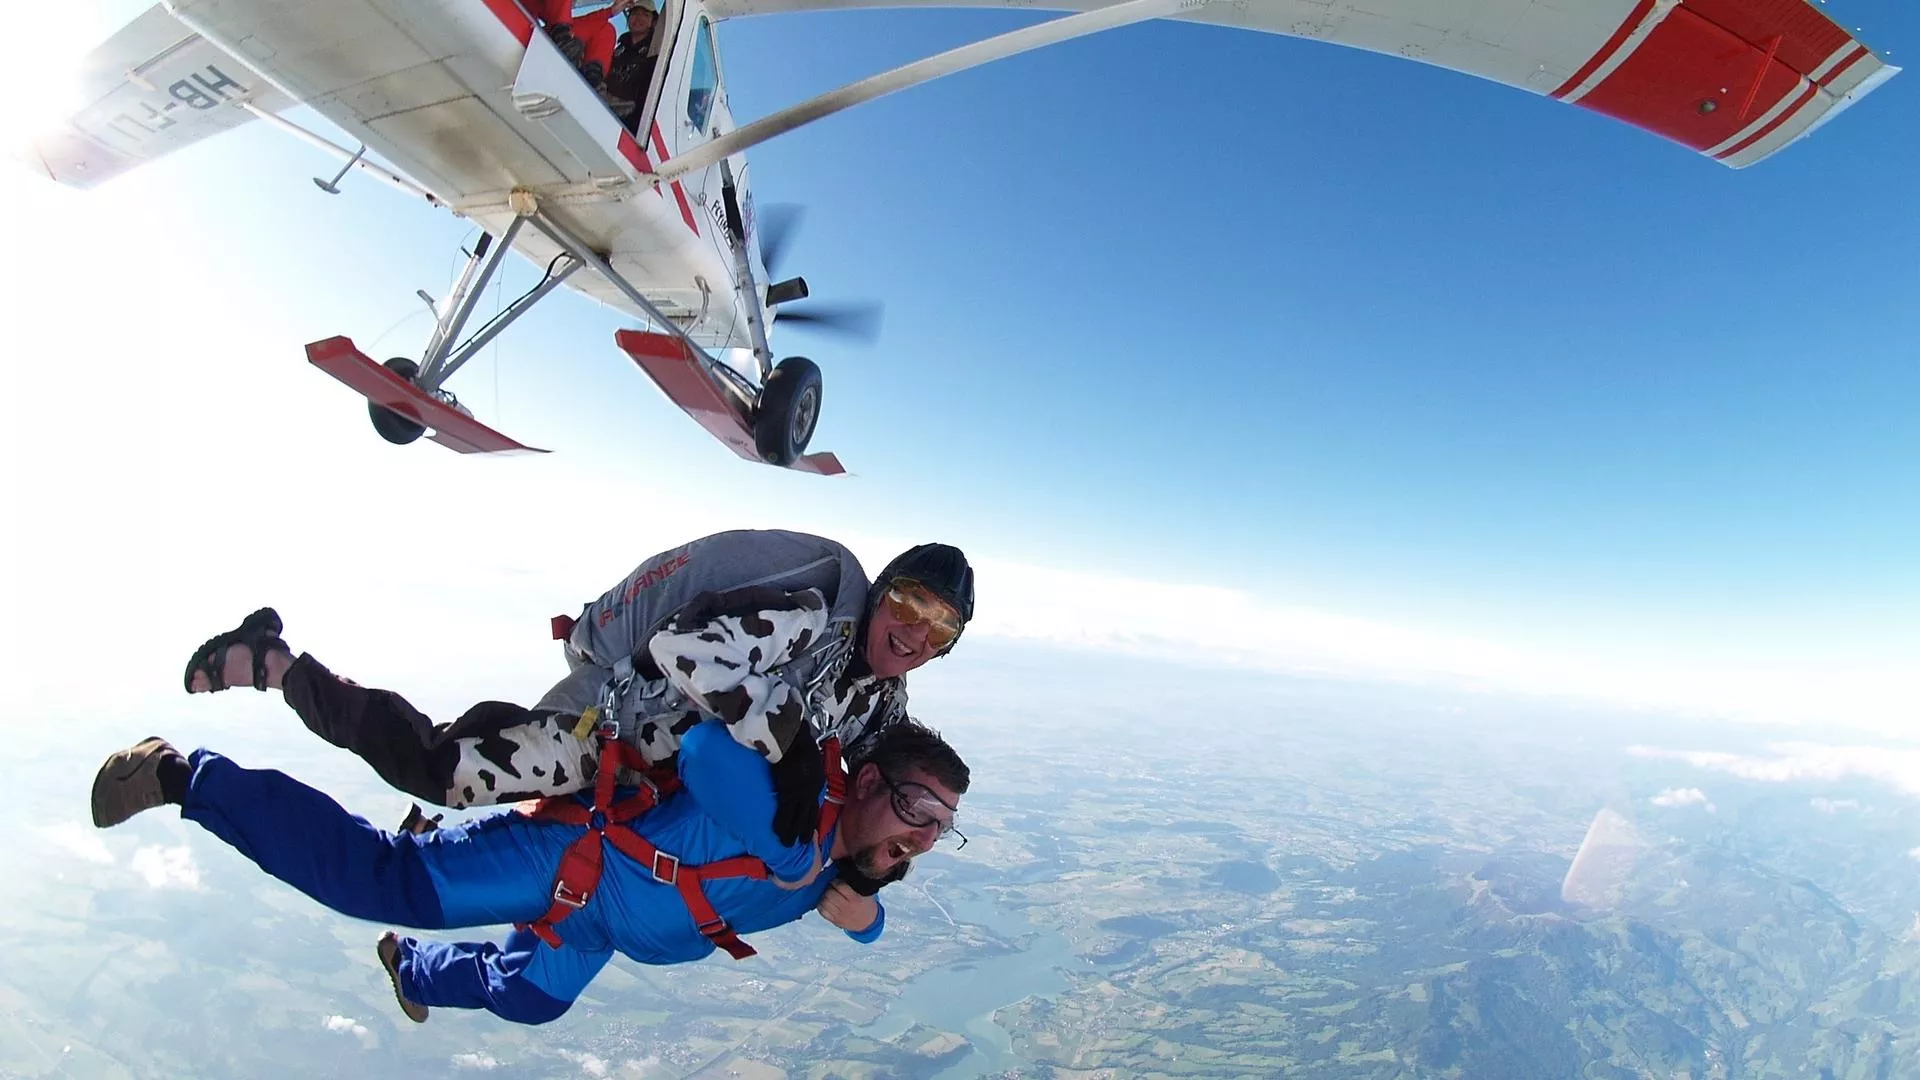 Center School Skydiving French Riviera in France, Europe | Skydiving - Rated 0.9